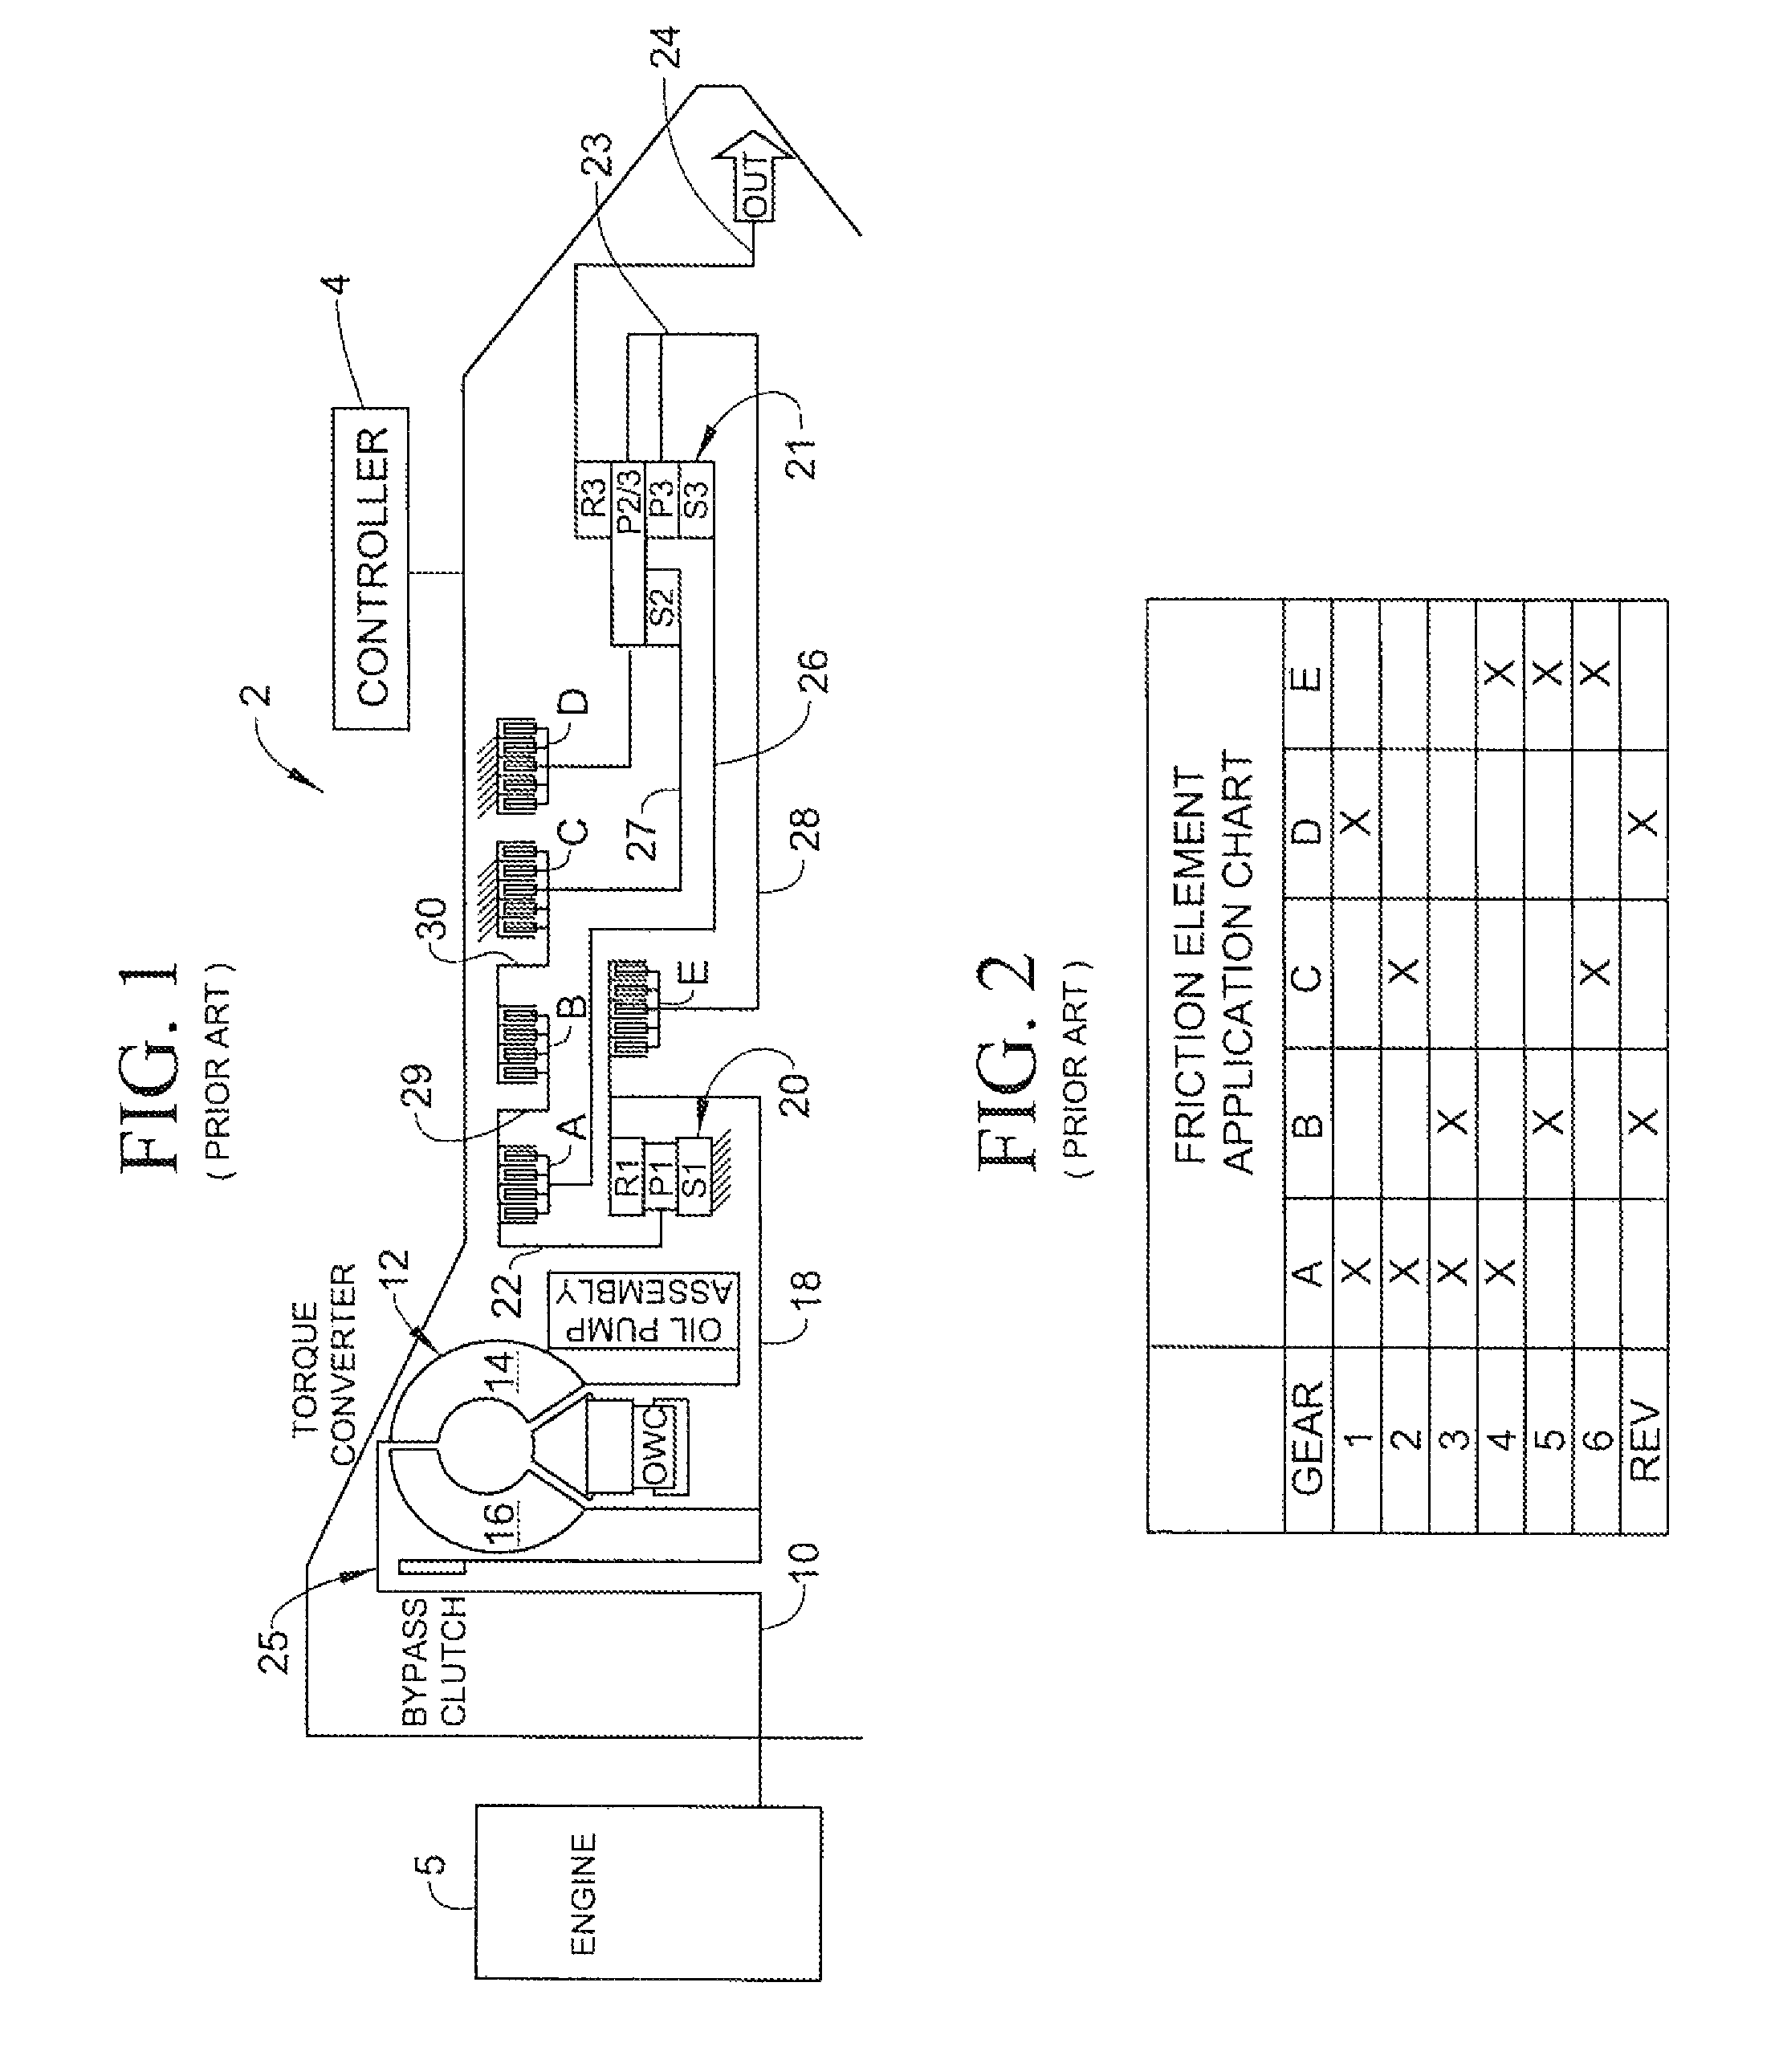 Closed-loop torque phase control for shifting automatic transmission gear ratios based on friction element load estimation